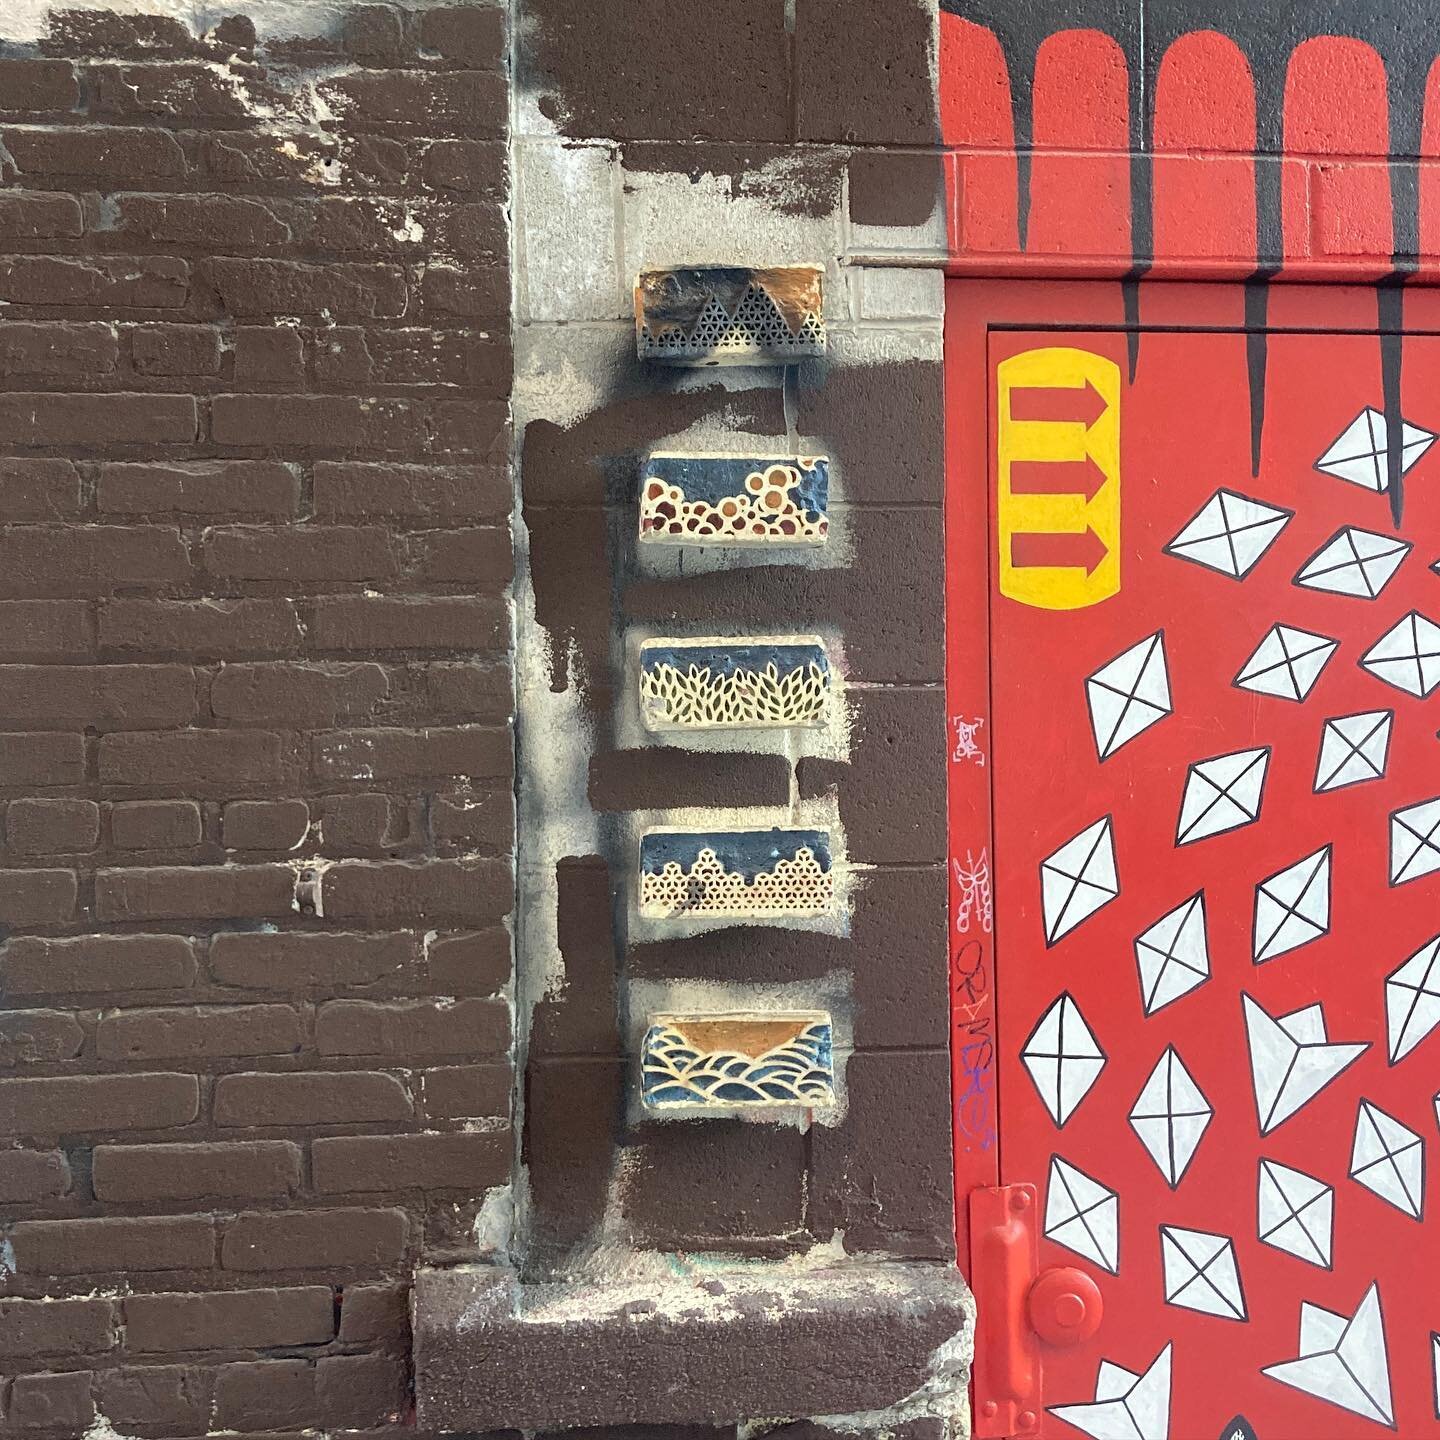 Progression picks. Five year check up. Not a fan of the new brown paint around the bricks, but love the faded colors on the bricks.

@blackcatmke toss a label up there for @atkinsonworks 

#creamcity #creamcitybrick #blackcatalley